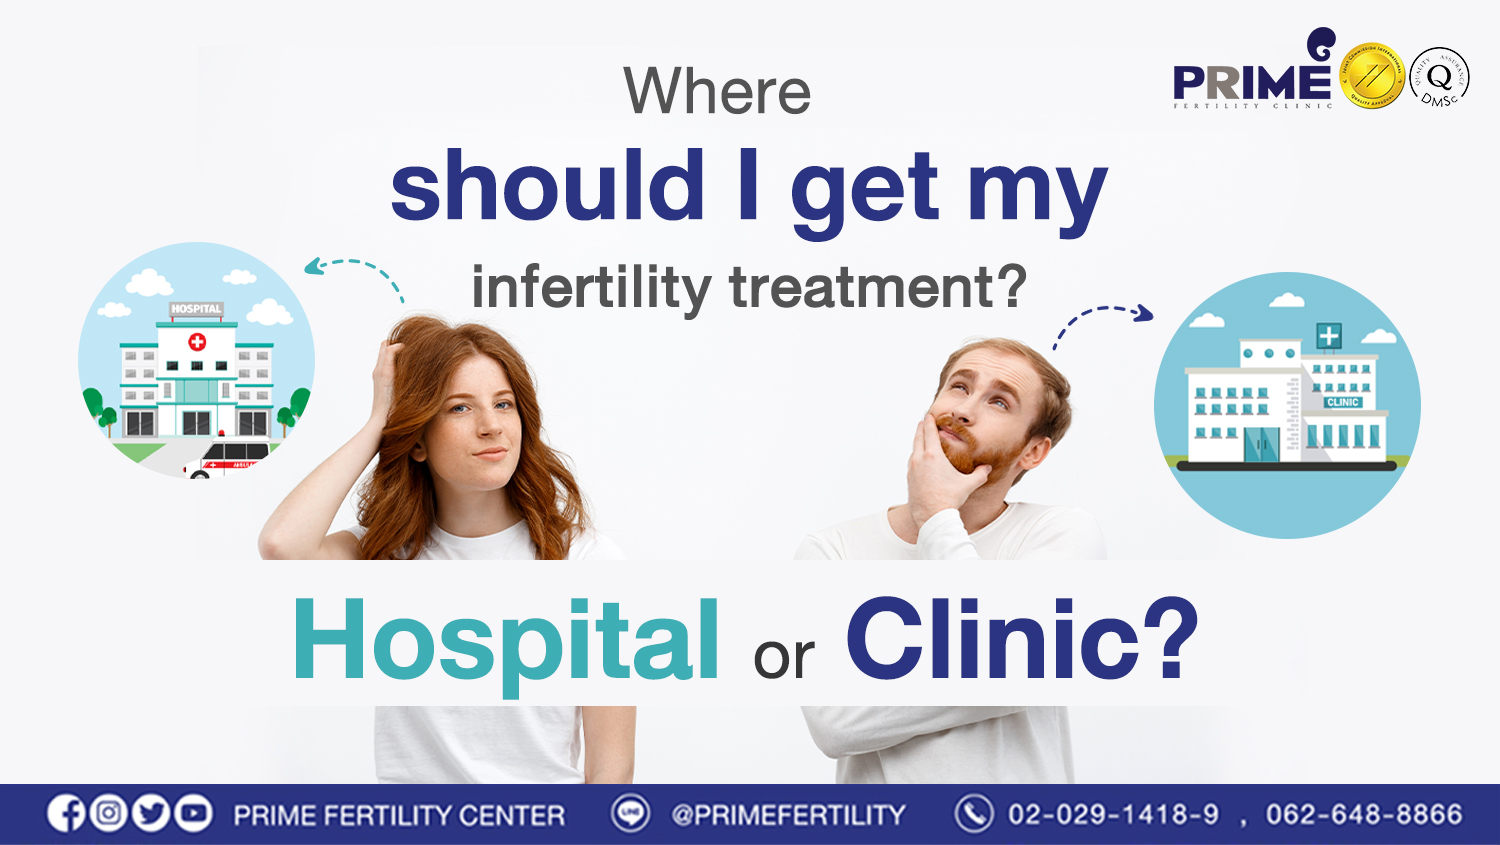 Where should I get my infertility treatment? Hospital? or Clinic?